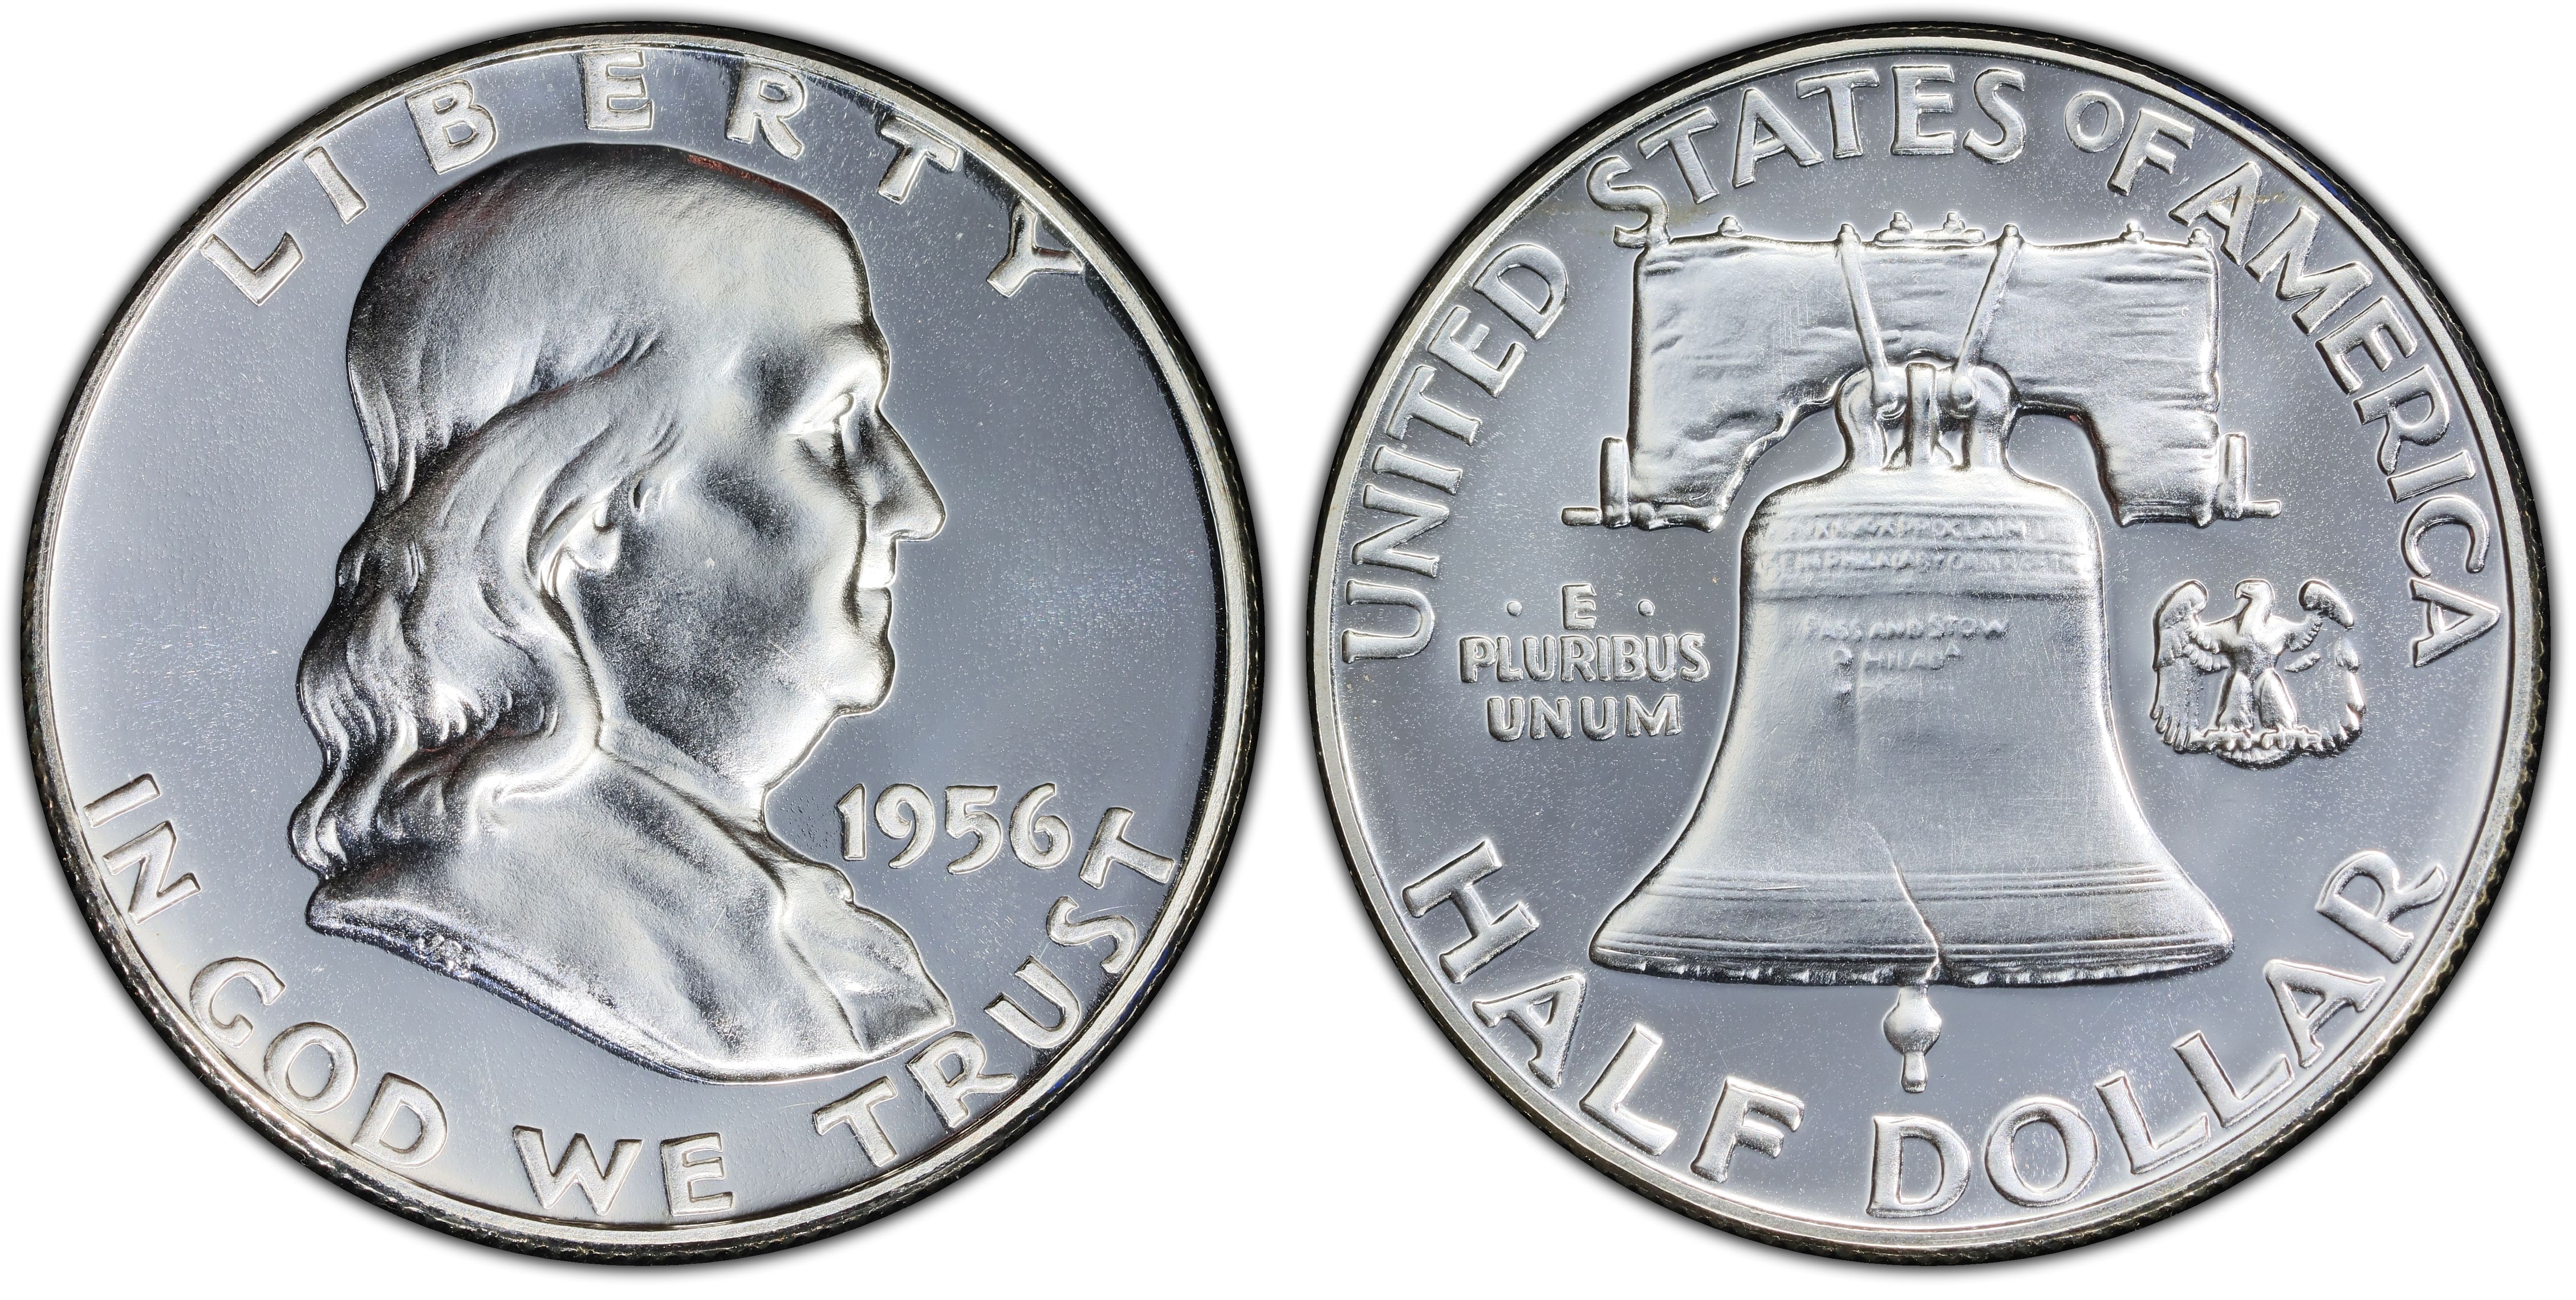 1956 50C Type 1 (Proof) Franklin Half Dollar - PCGS CoinFacts